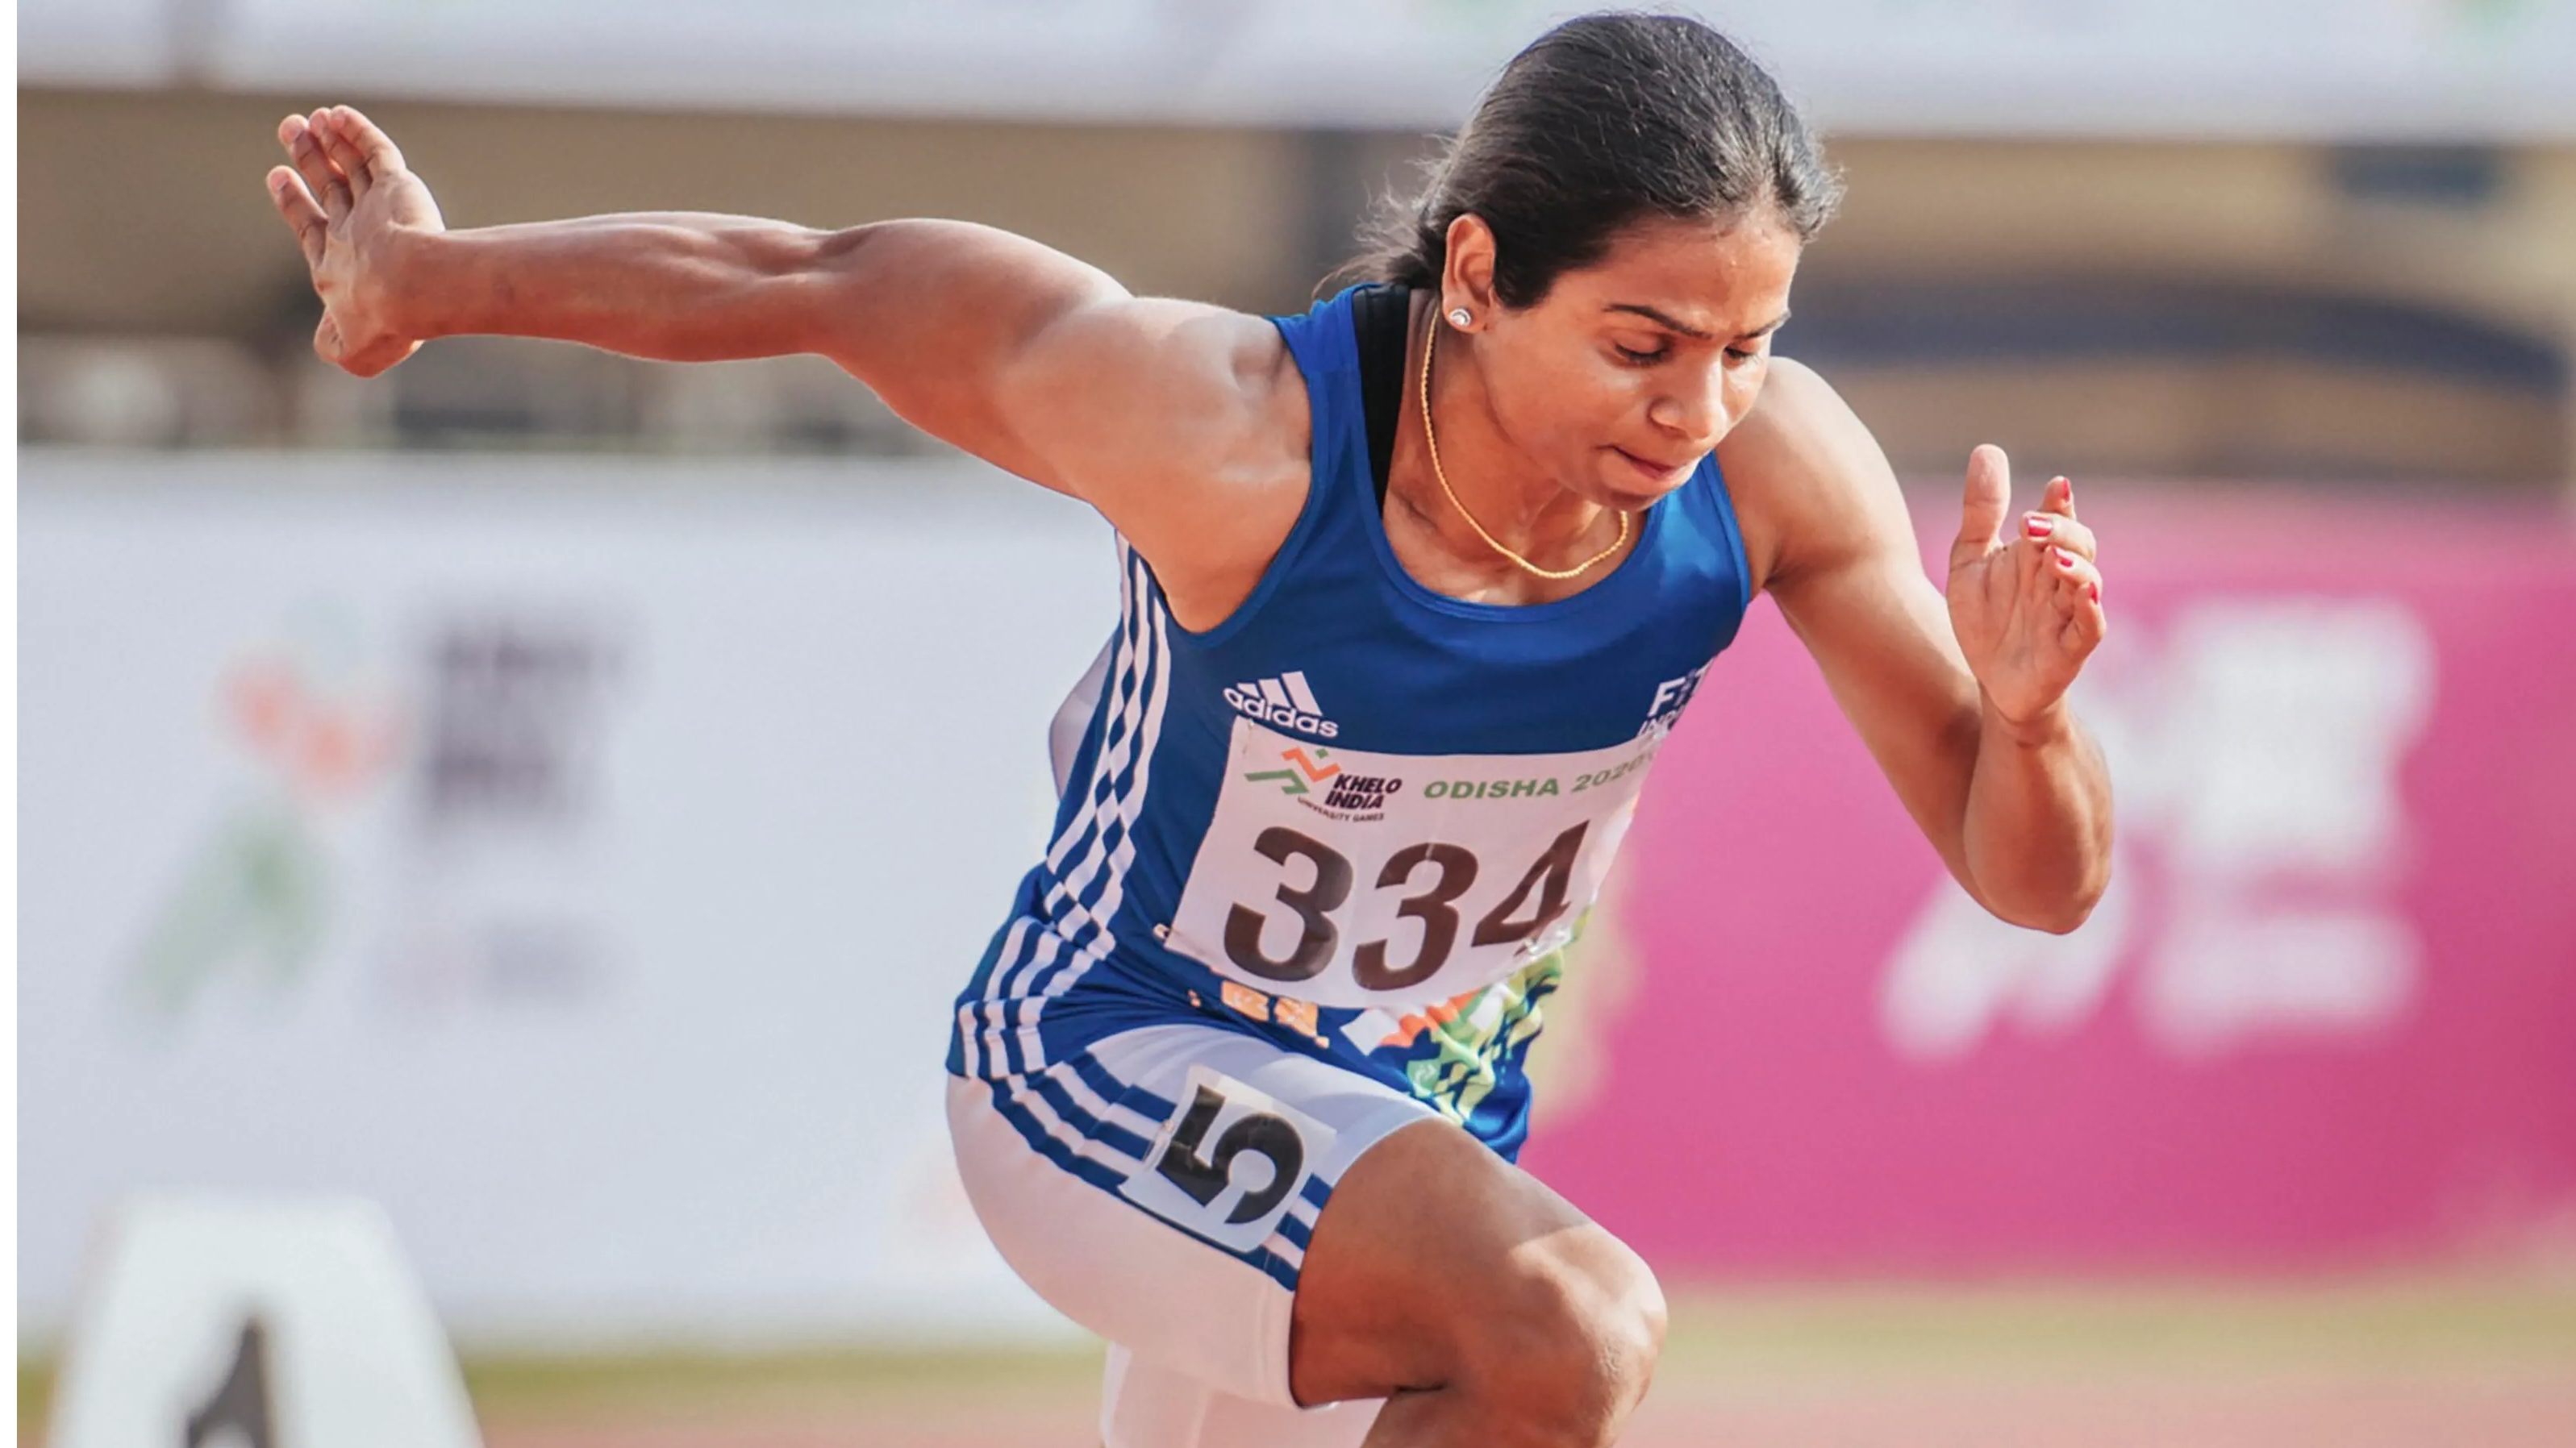 Tokyo Olympics: India’s Dutee Chand finishes 7th in women’s 100m Heat 5